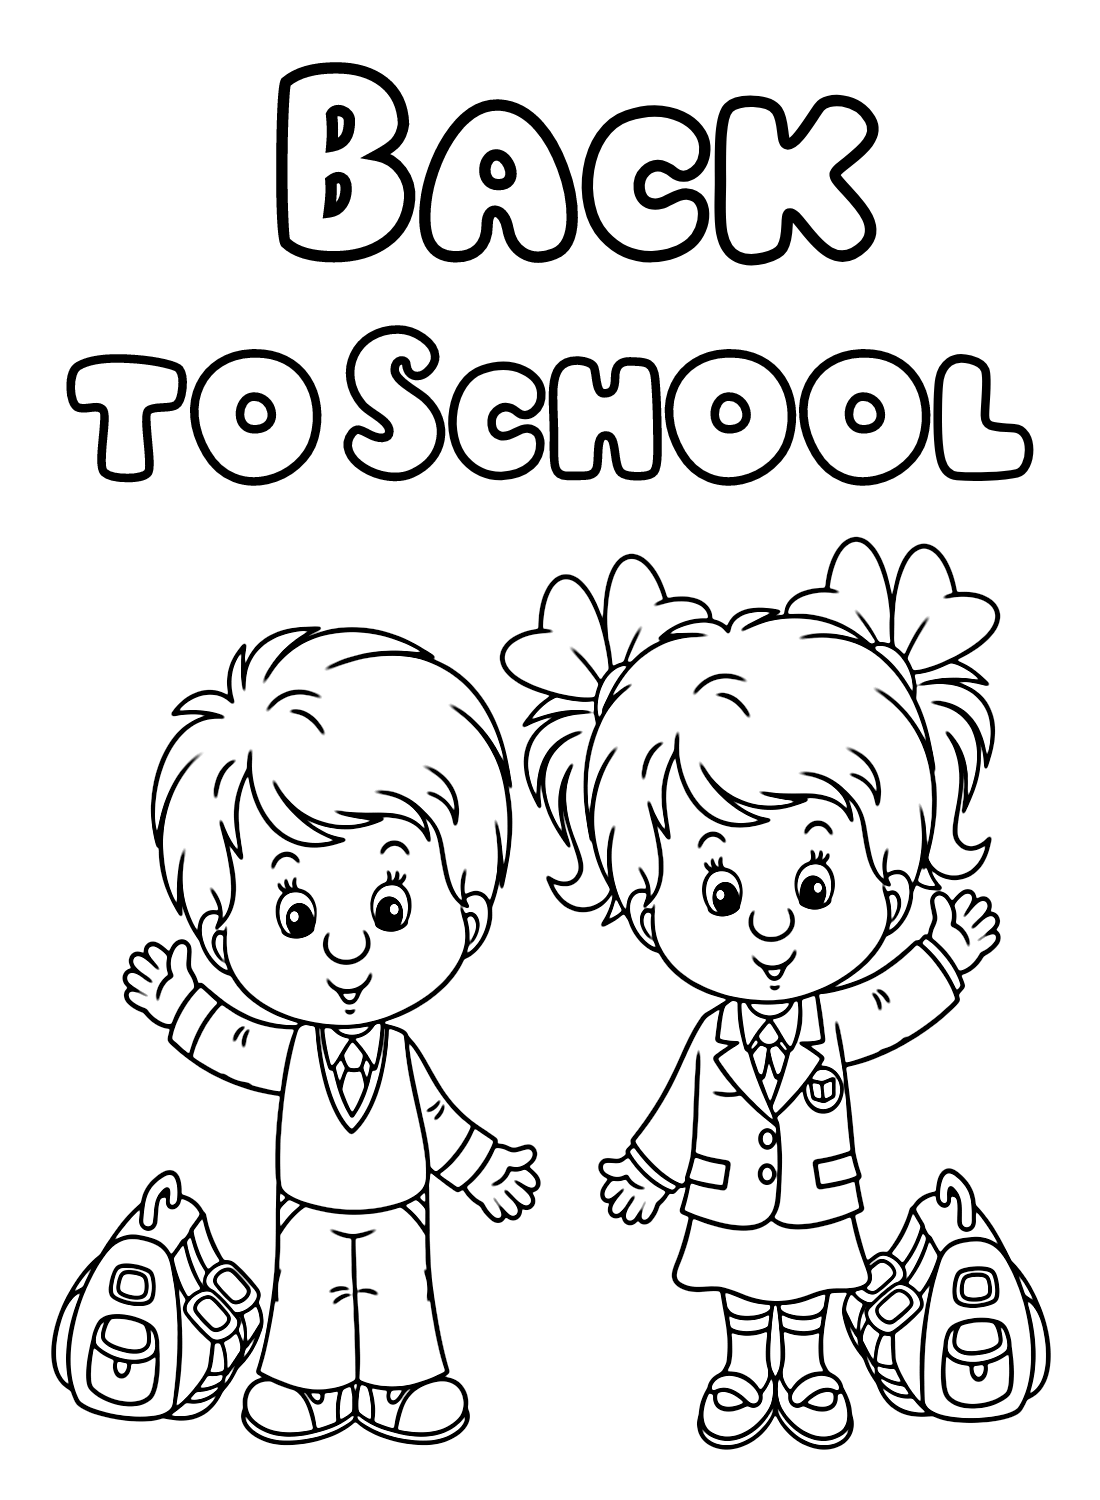 Printable Back to School Coloring - Free Printable Coloring Pages